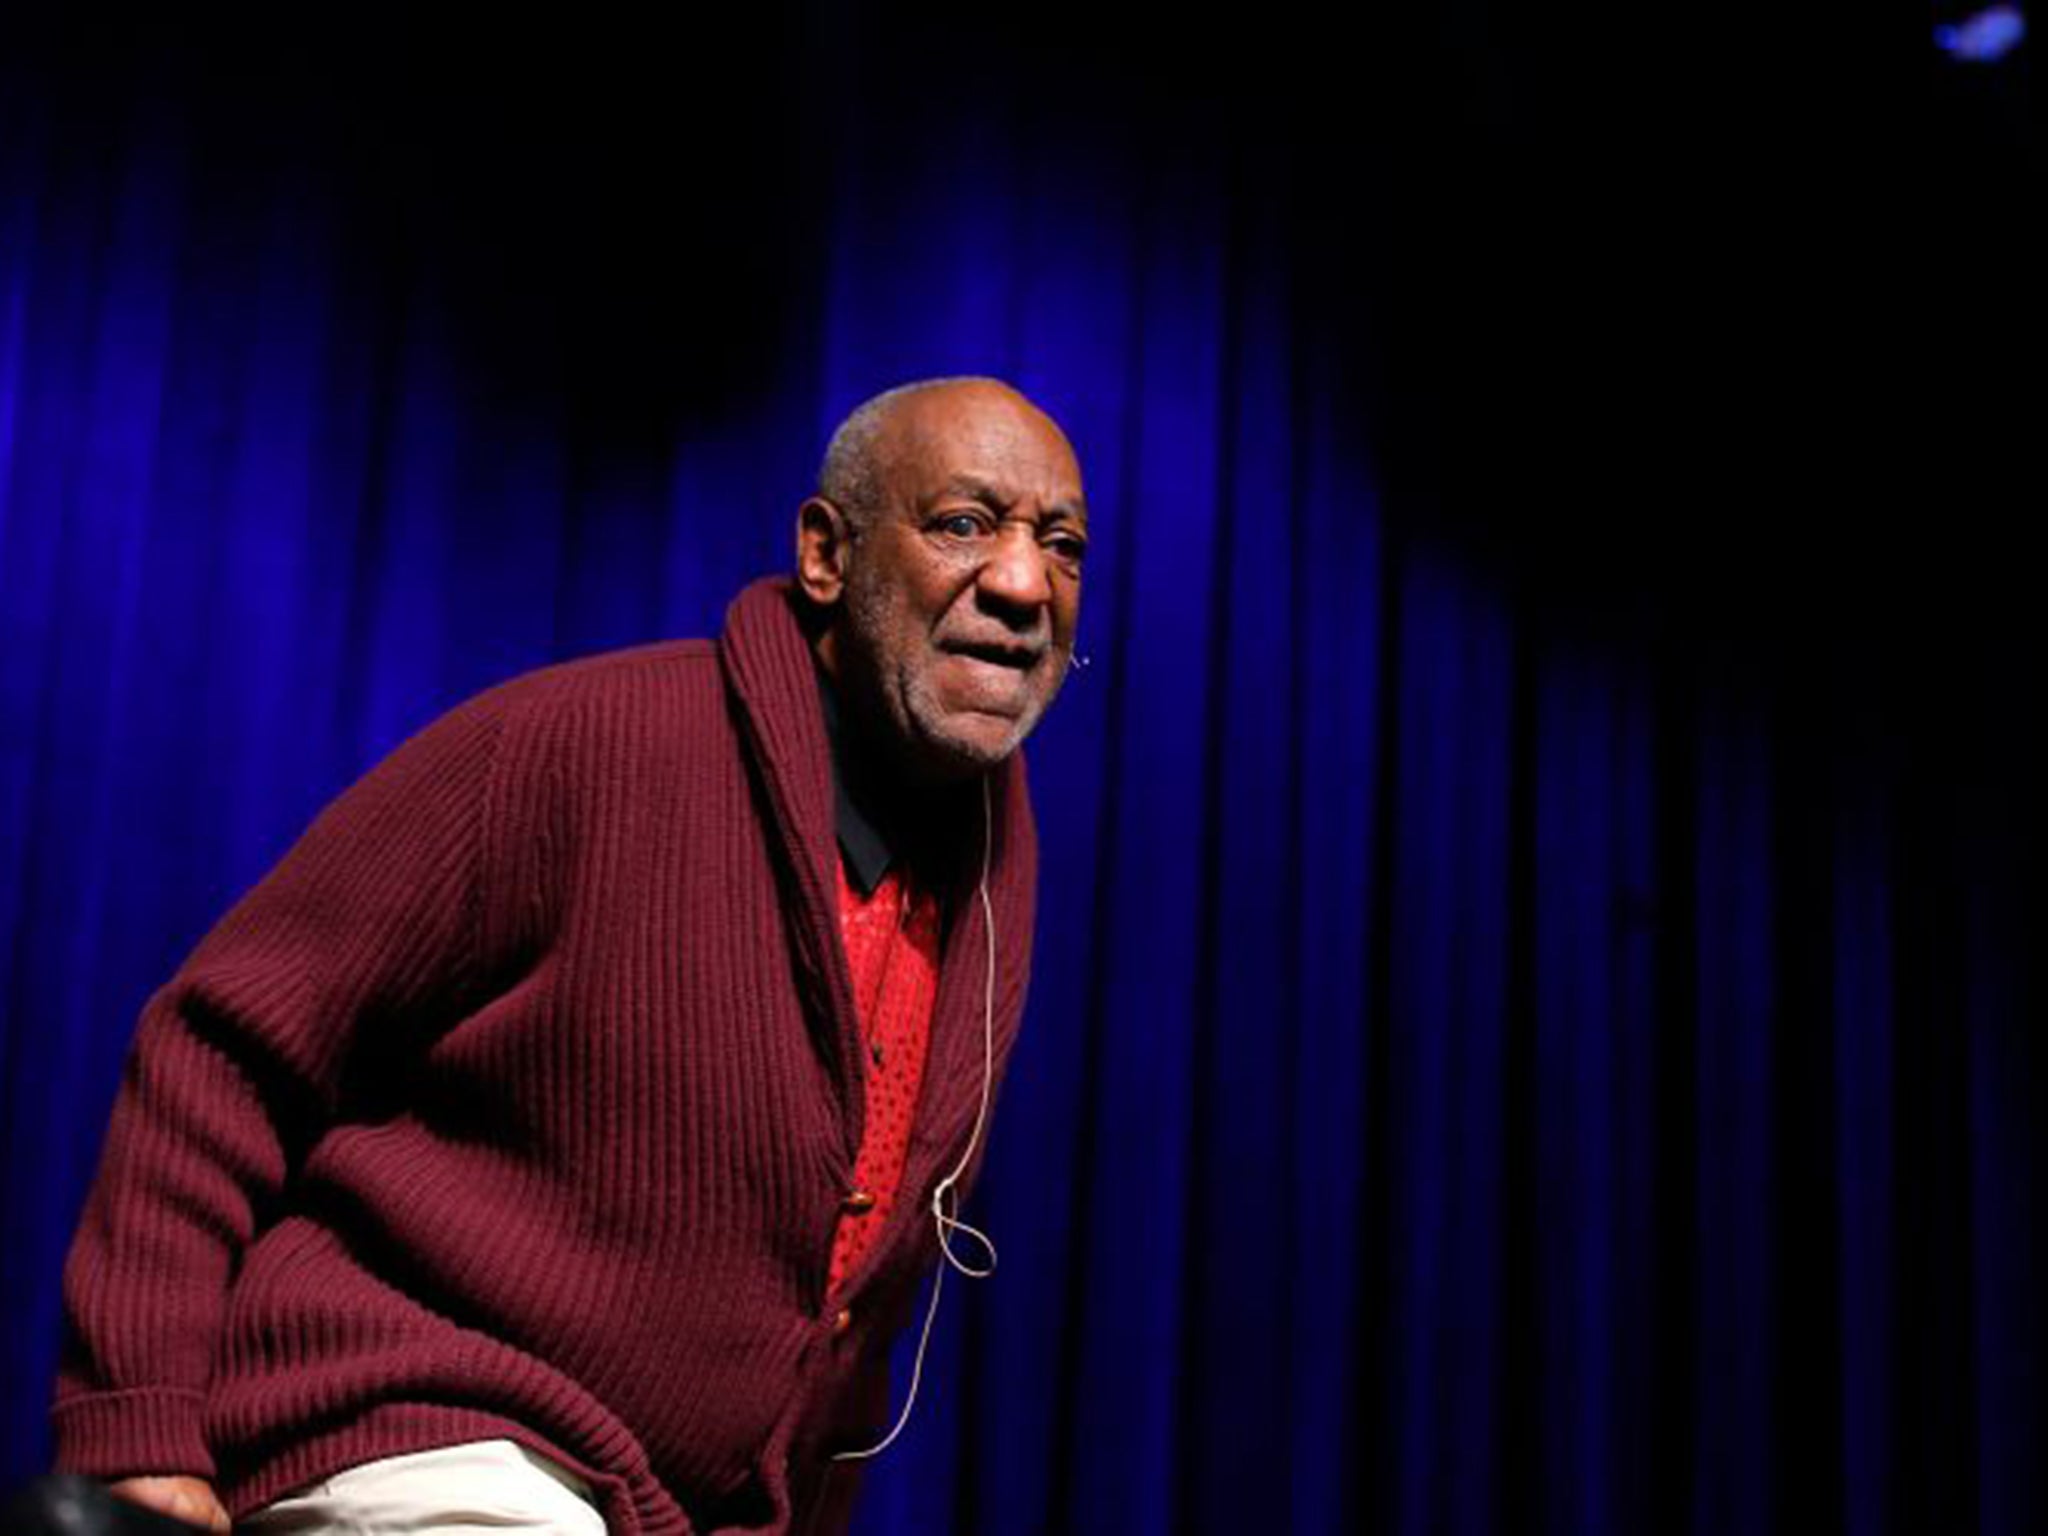 Jokes about rape may, sometimes, be acceptable but not when delivered by the likes of Bill Cosby (Getty)